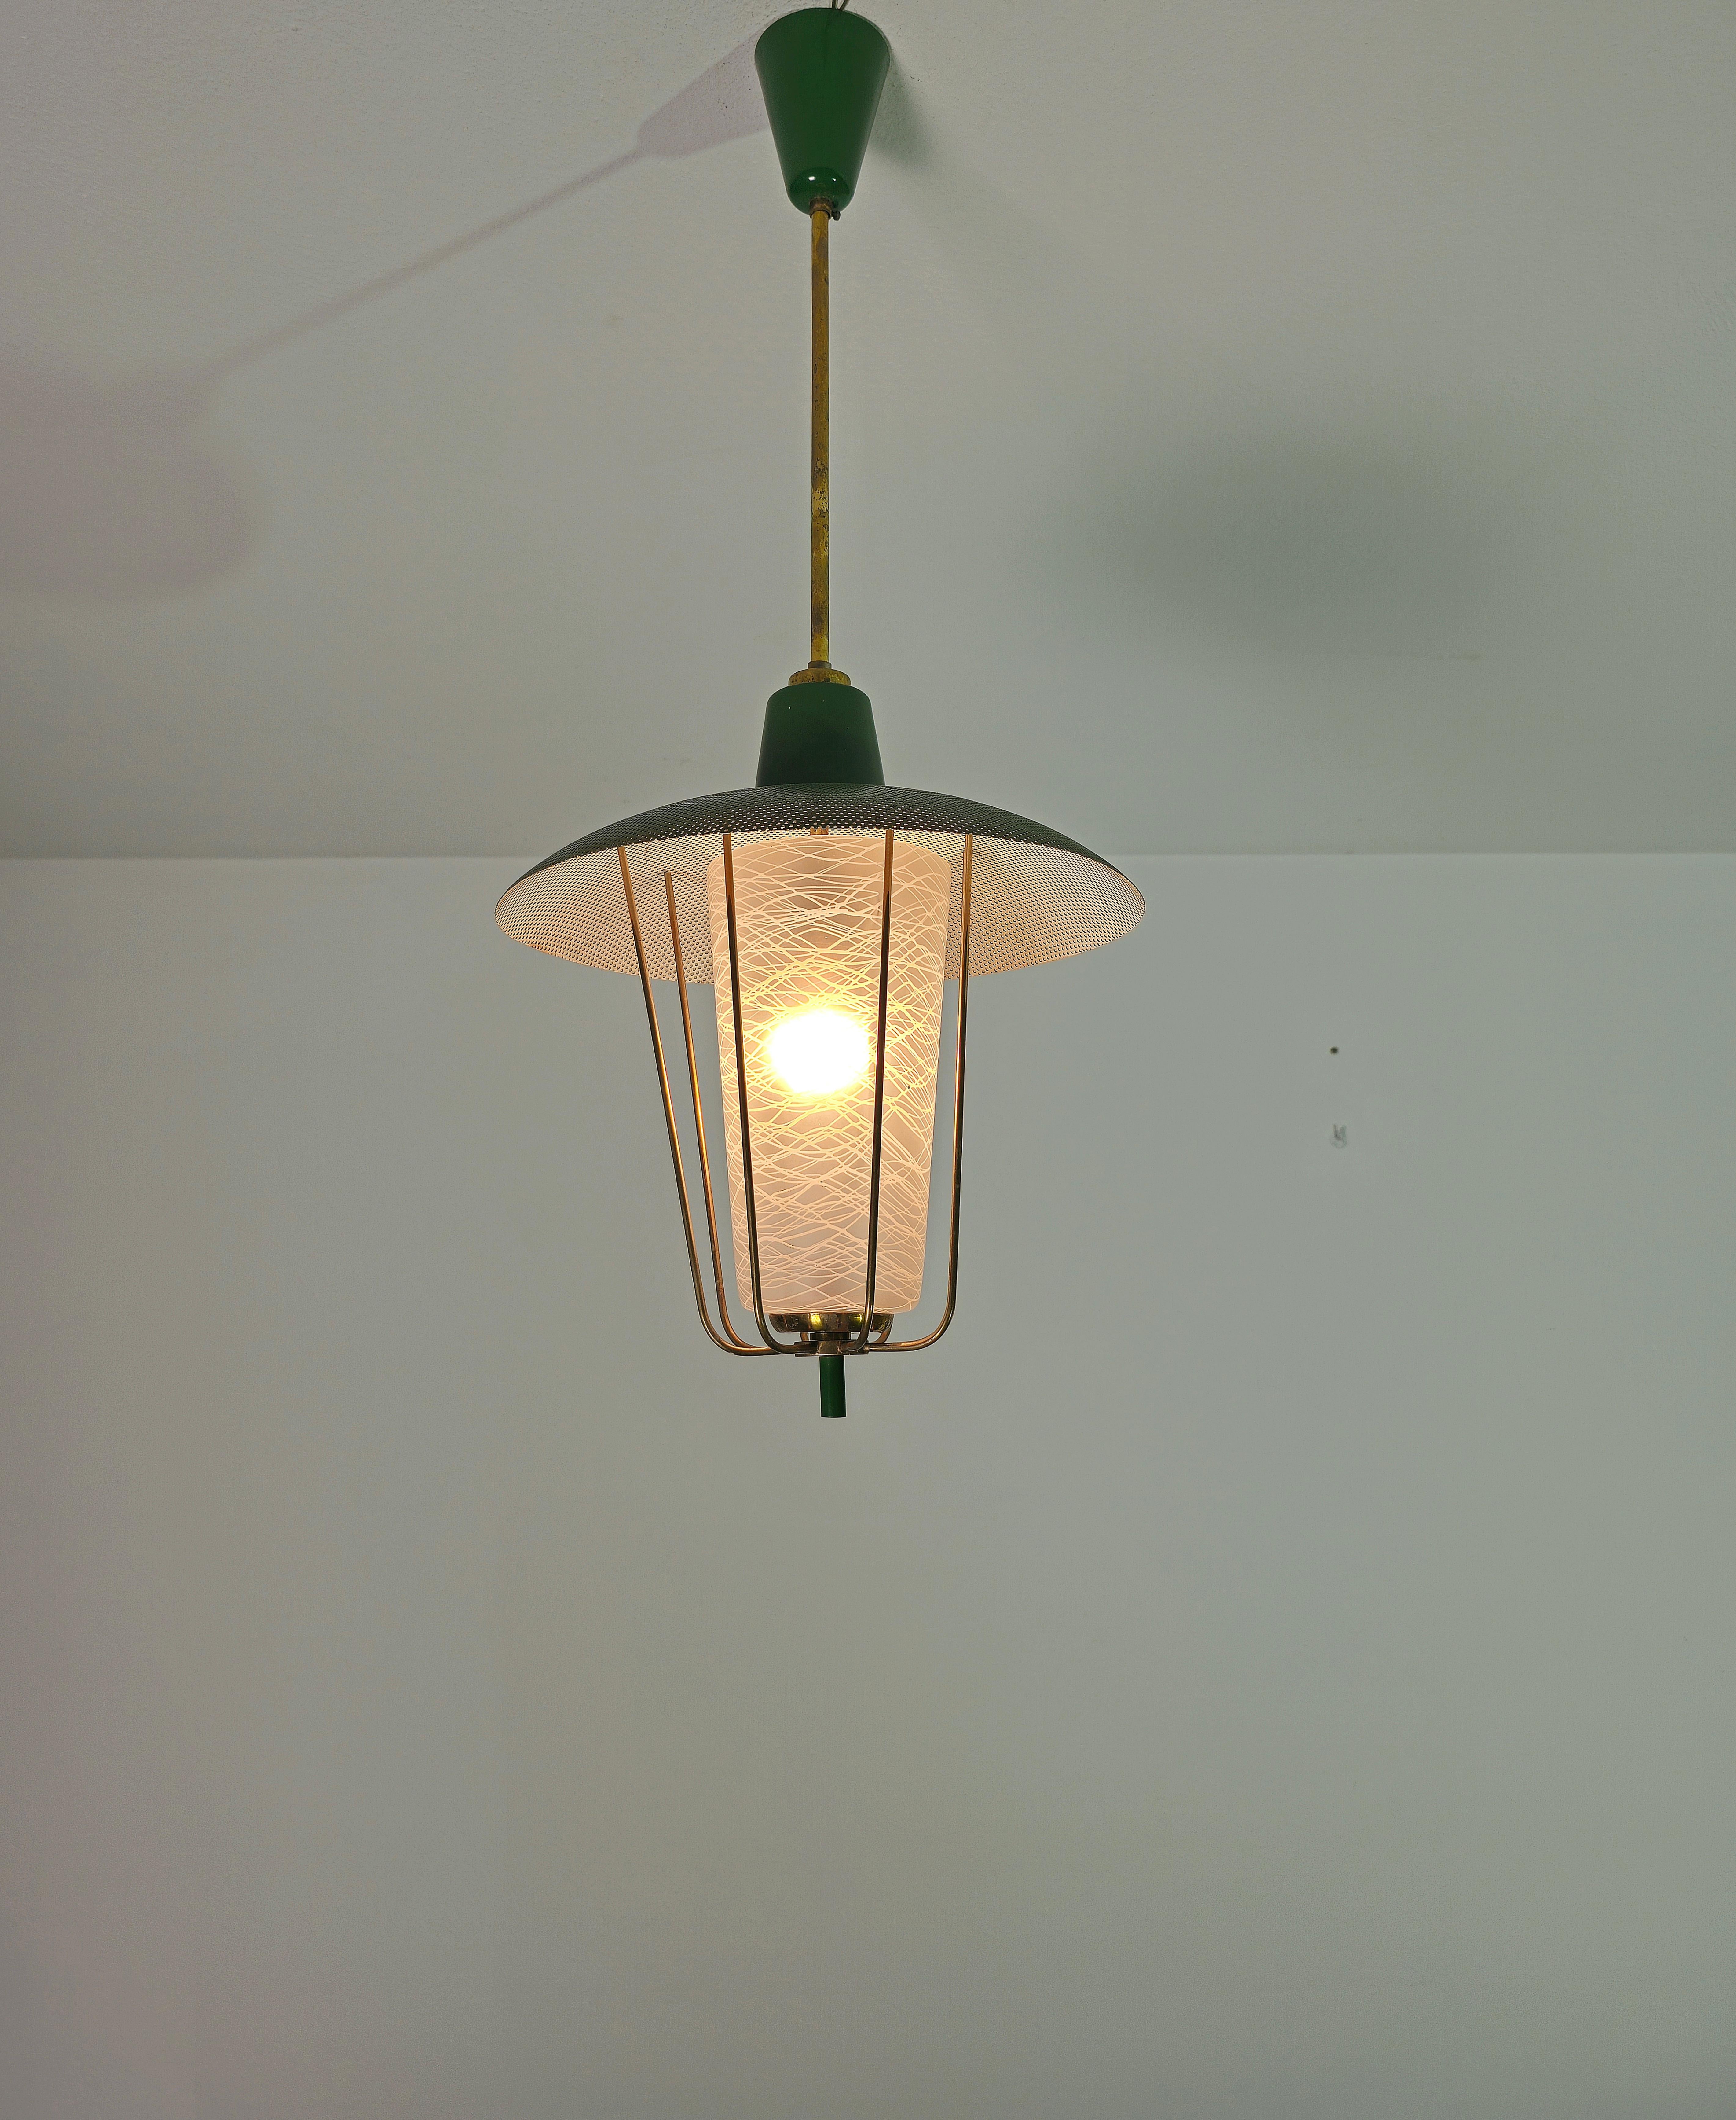 Pendant Chandelier Glass Brass Green Midcentury Modern Italian Design 1950s In Good Condition For Sale In Palermo, IT